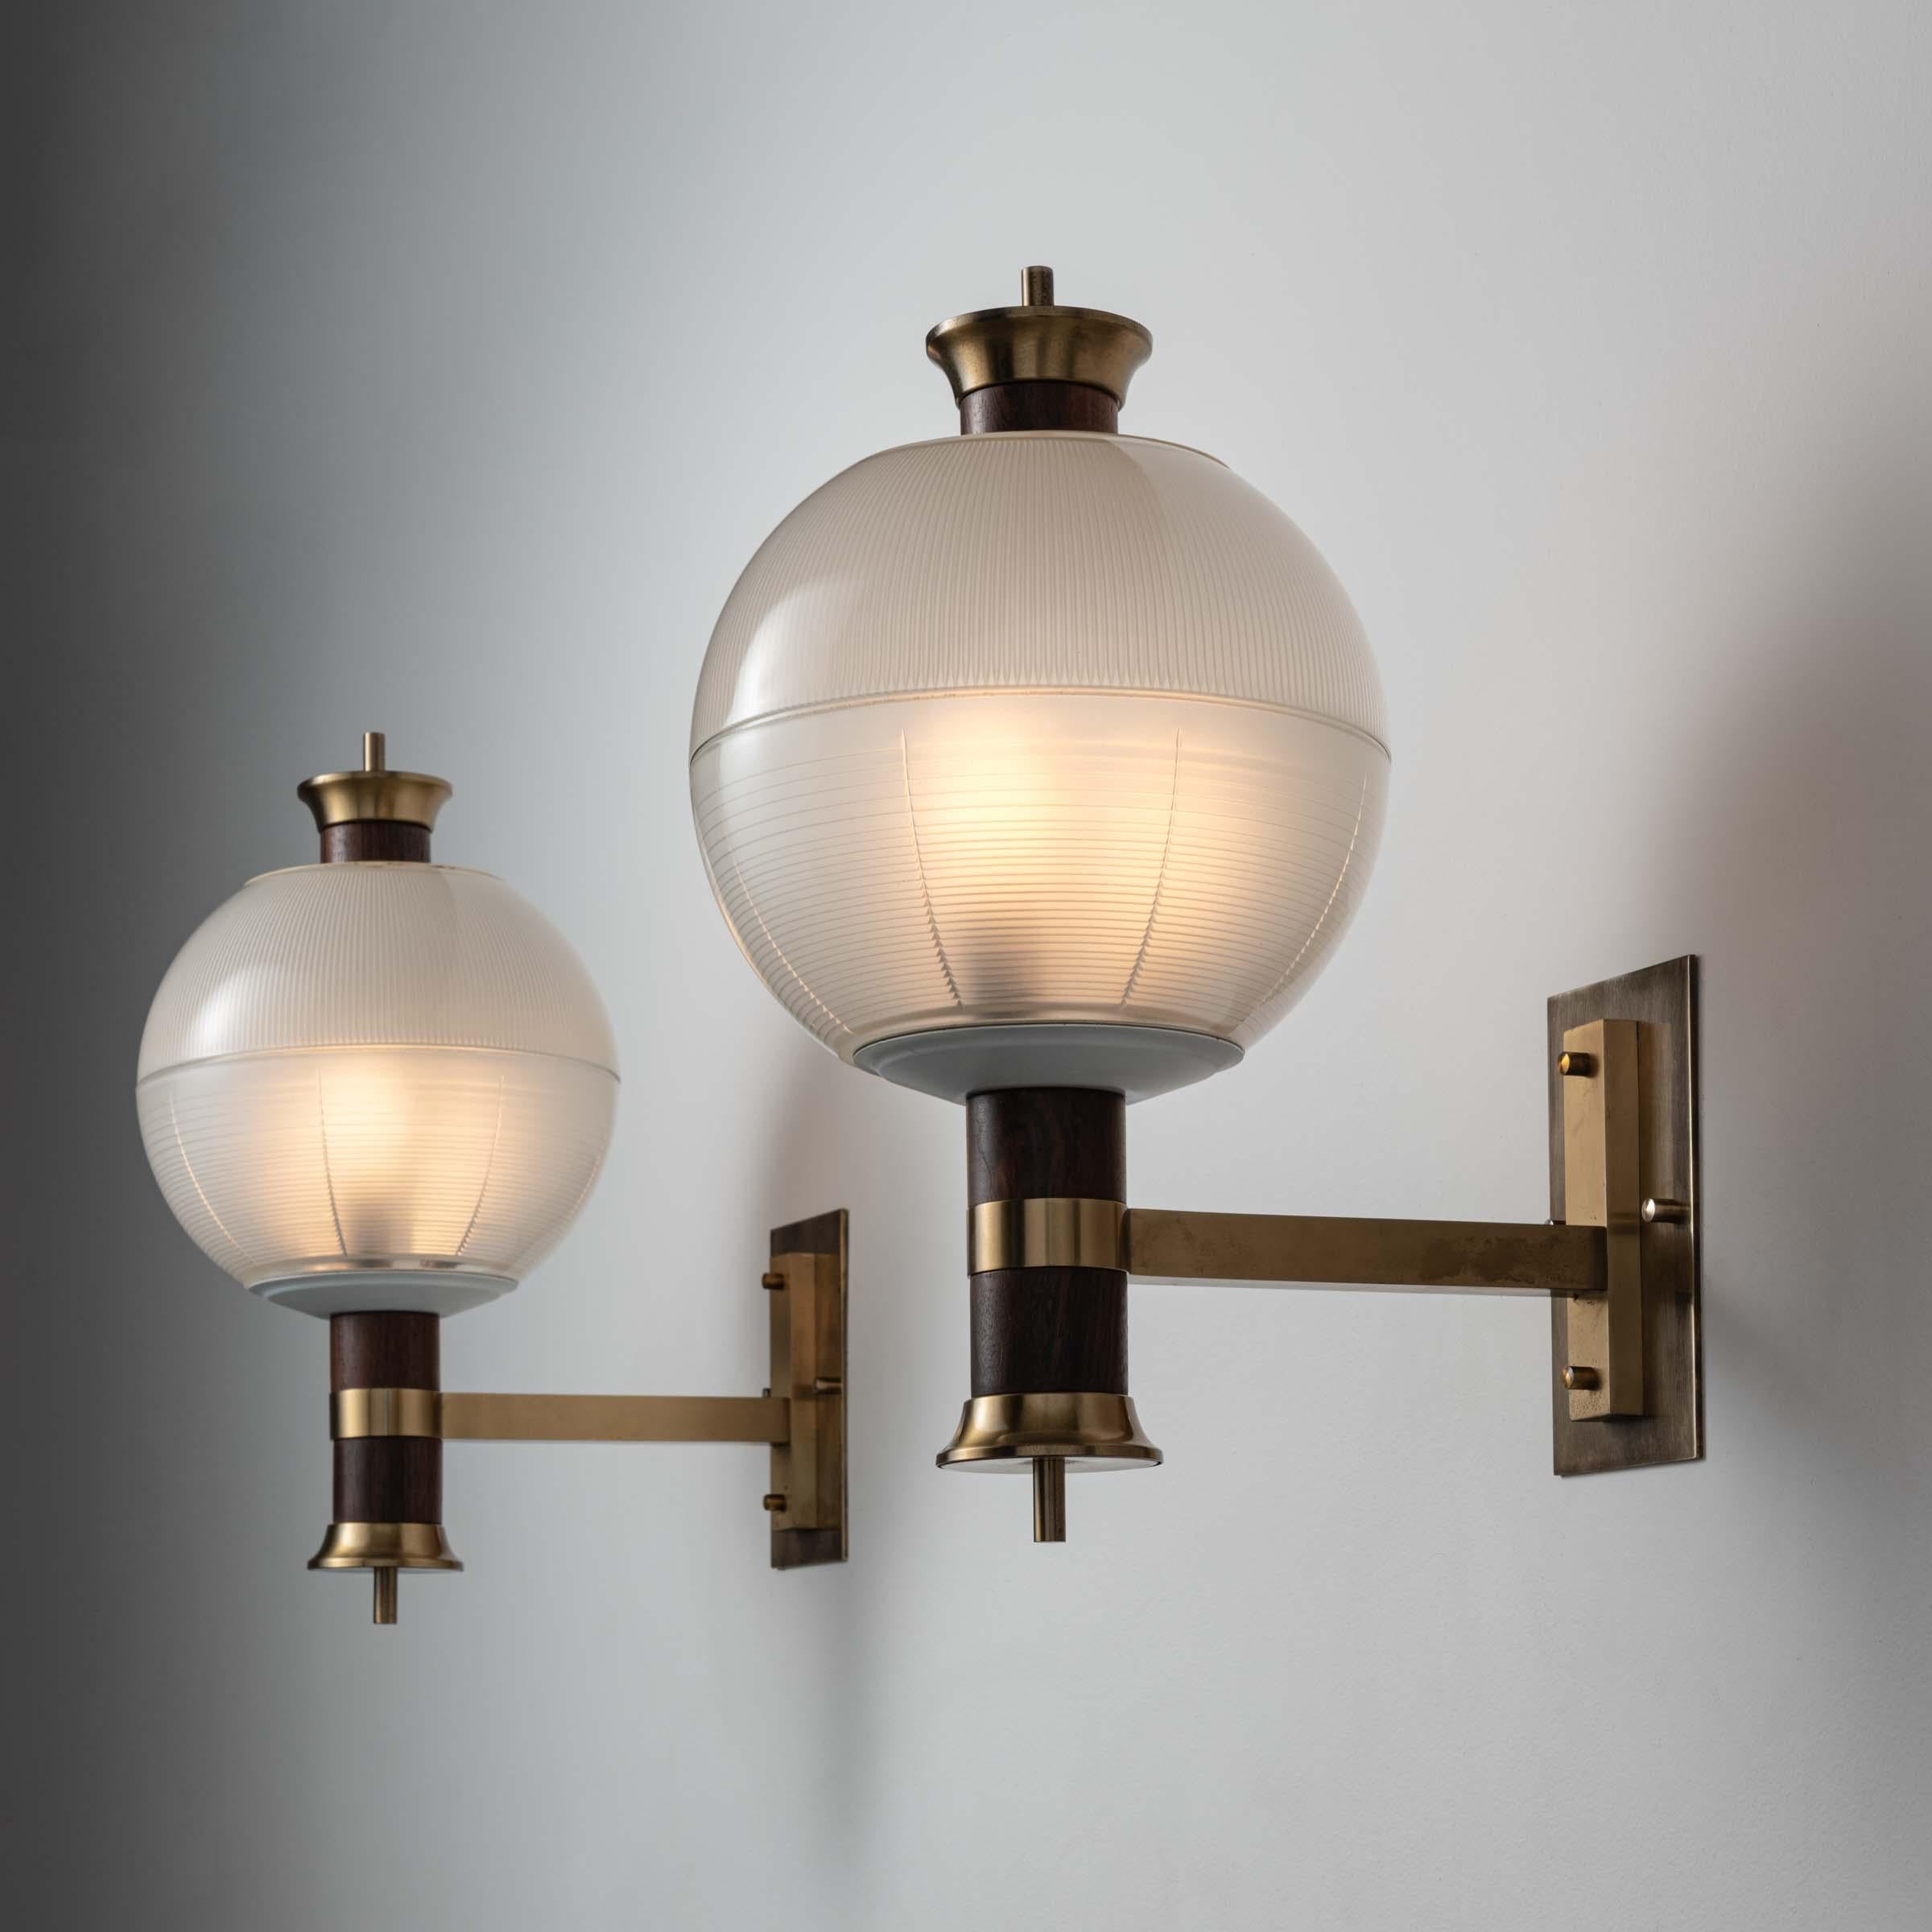 Pair of sconces by Michele Achilli, Daniele Brigidini, Guido Canella. Designed and manufactured in Italy, circa 1960's. Holophane glass, brass. Custom brass backplate. We recommend three E14 candelabra 25w maximum bulbs per sconce. Bulbs not